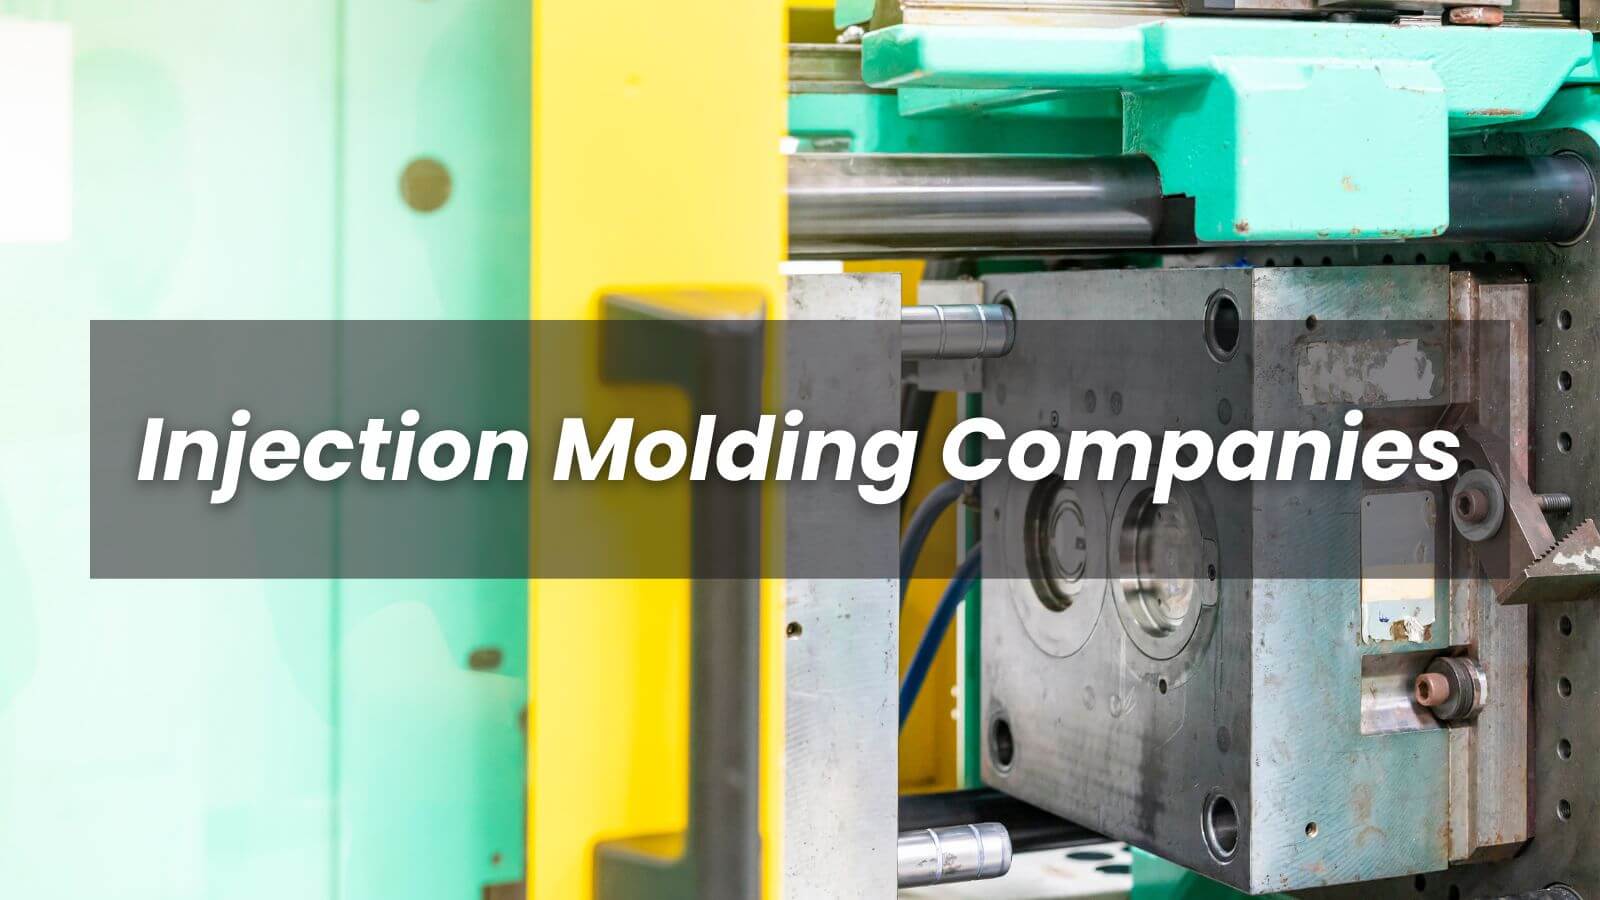 Injection Molding Companies in Mexico